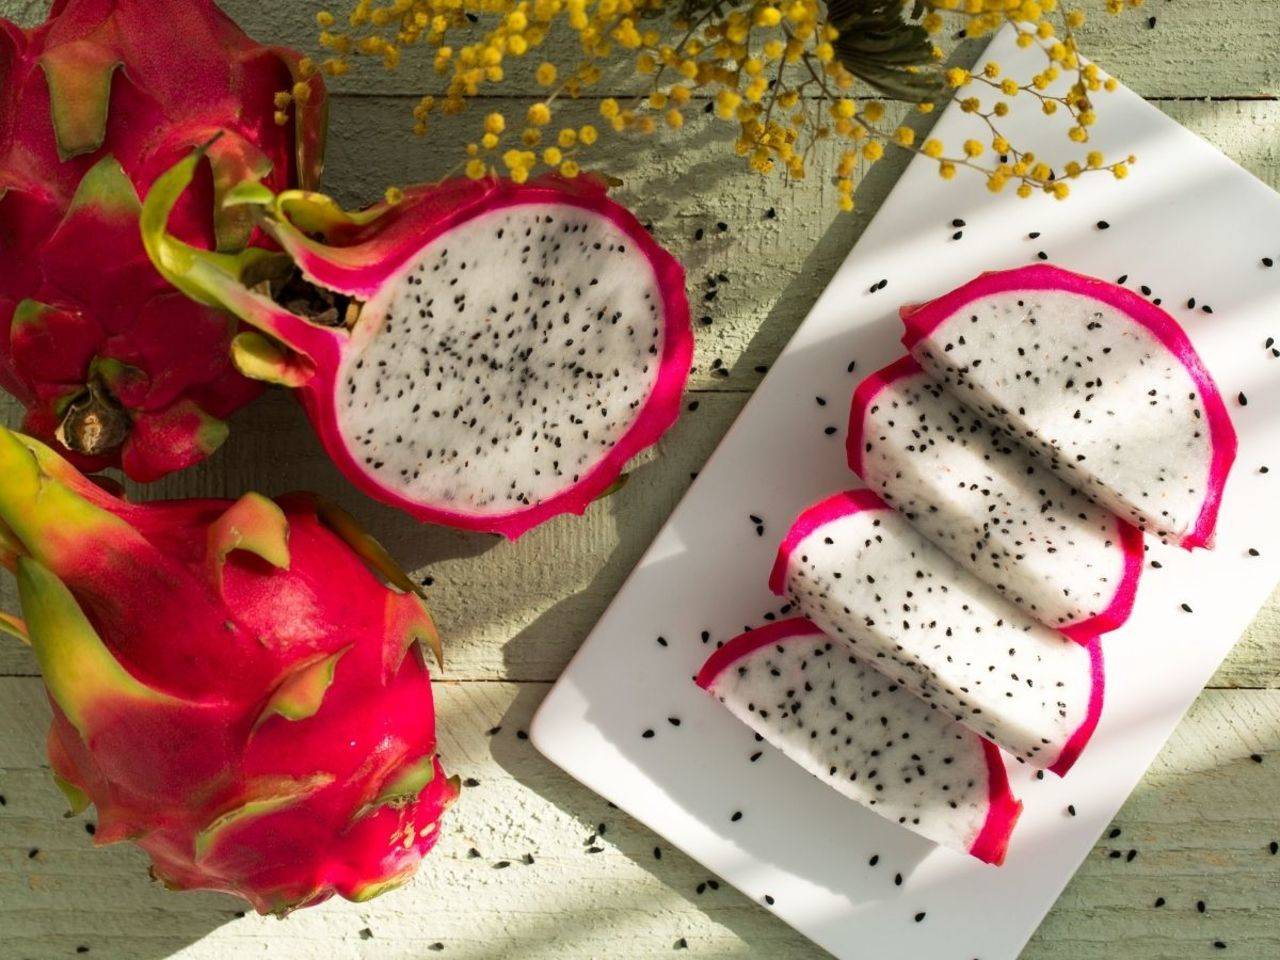 Why Dragon Fruit Is Healthy